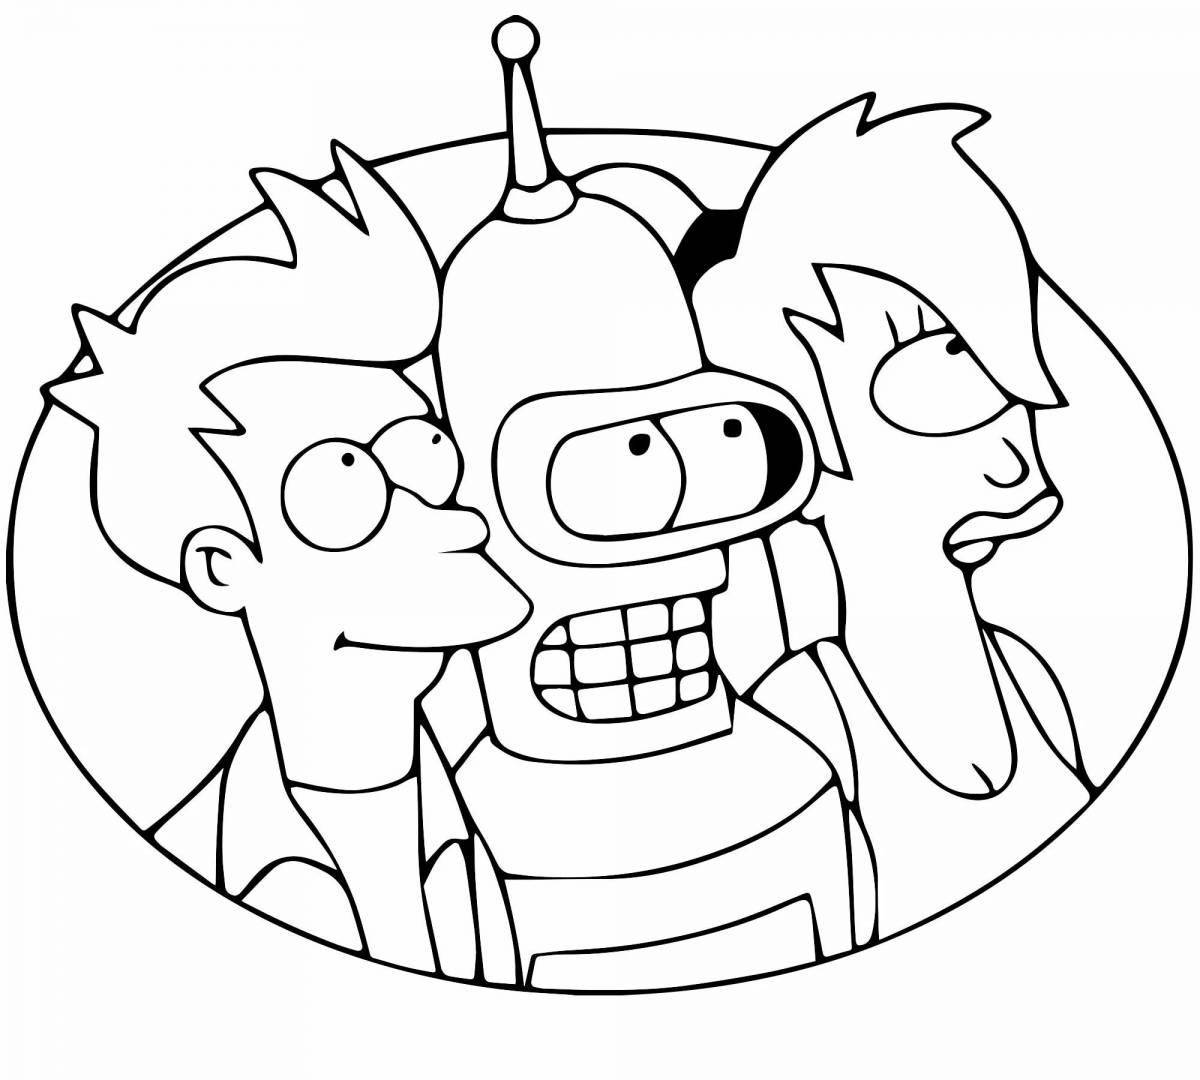 Animated bender coloring page